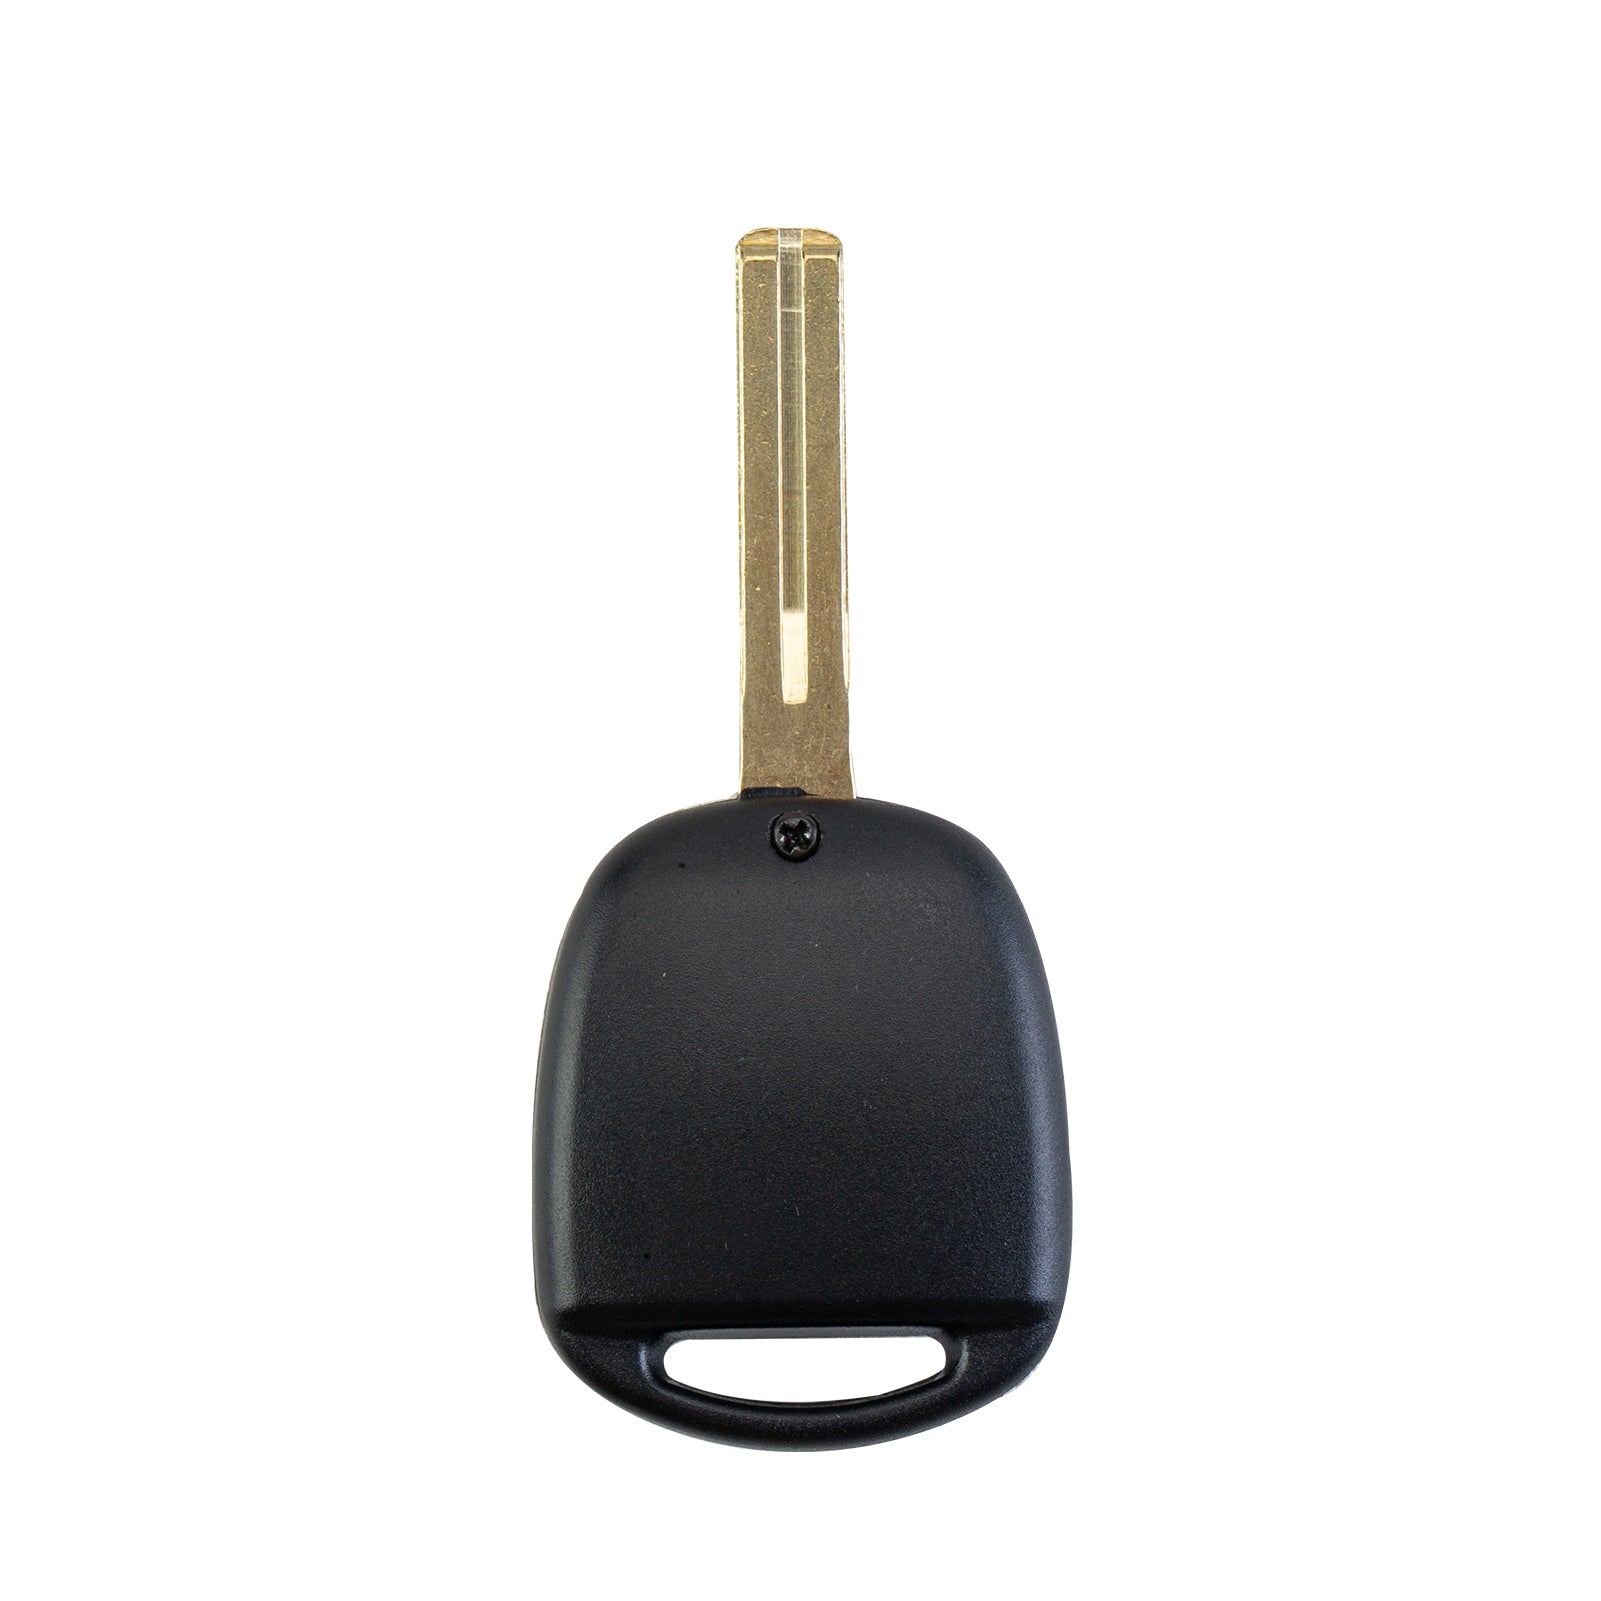 Extra-Partss Remote Car Key Fob Replacement for Lexus HYQ1512V 89785-50031 fits 2002 2003 2004 2005 IS300 GS430